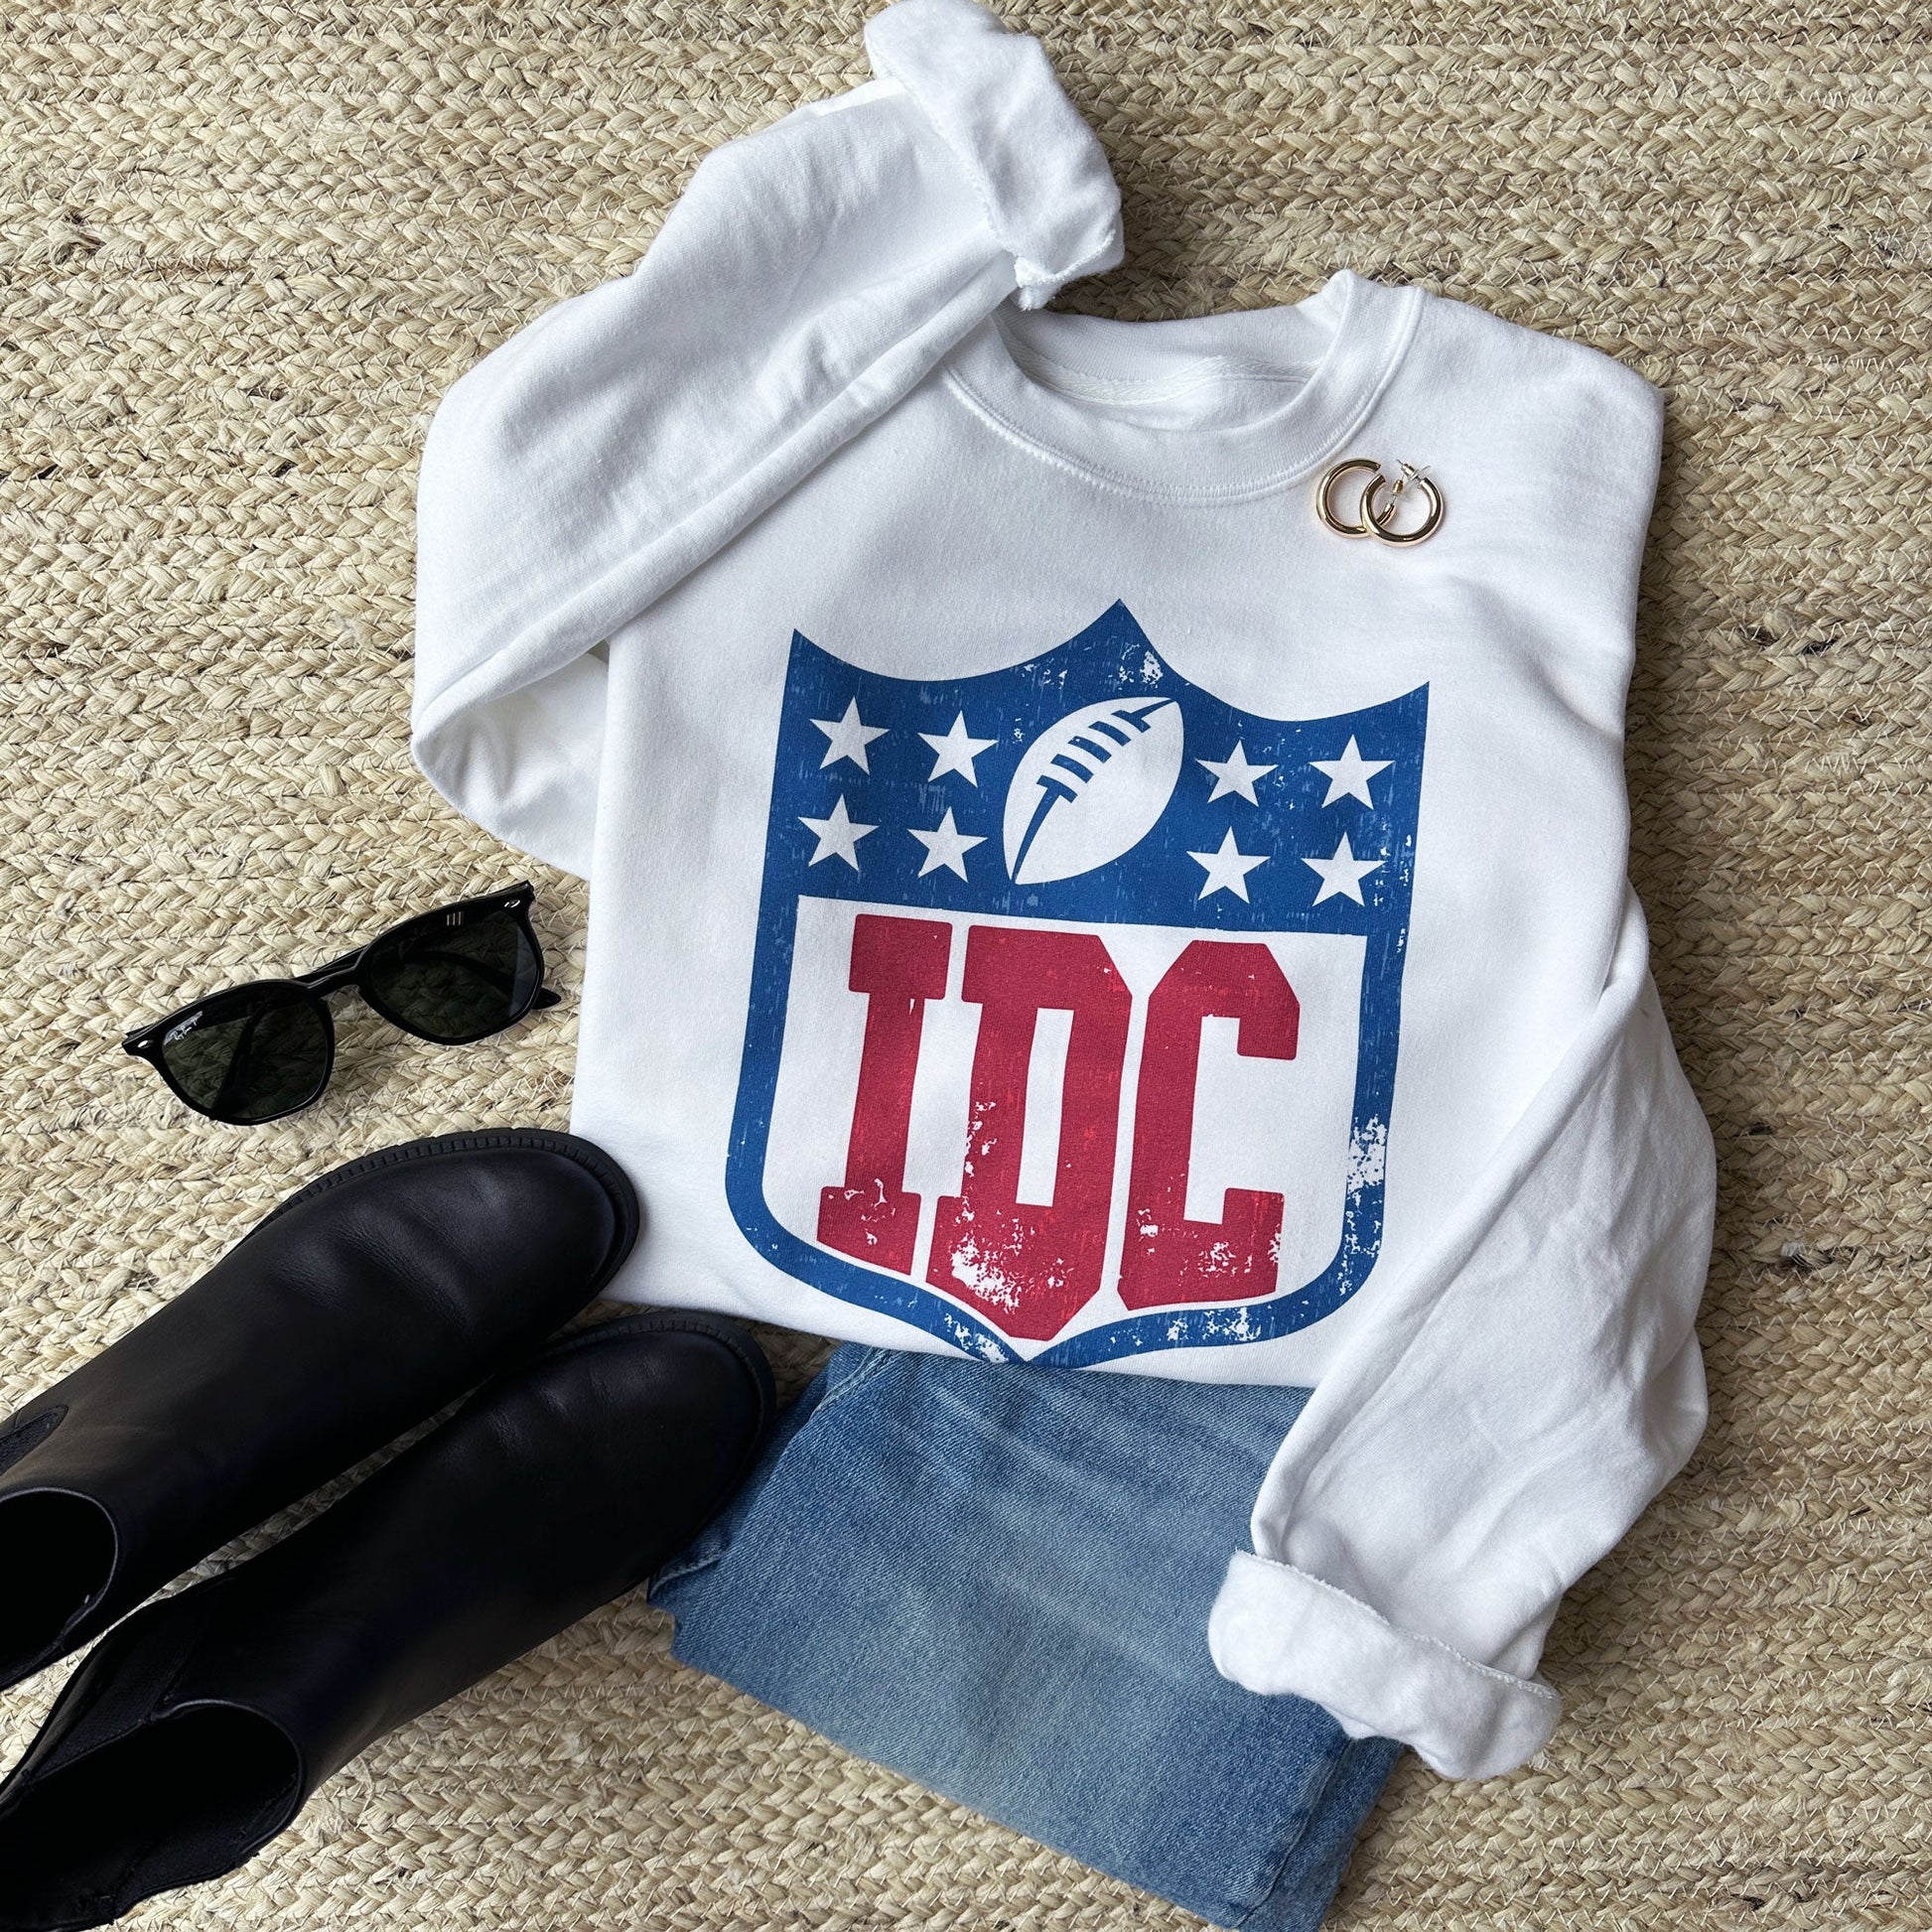 outfit layout featuring jeans, black booties, sunglasses, earrings, and a white pullover crew with an IDC football logo